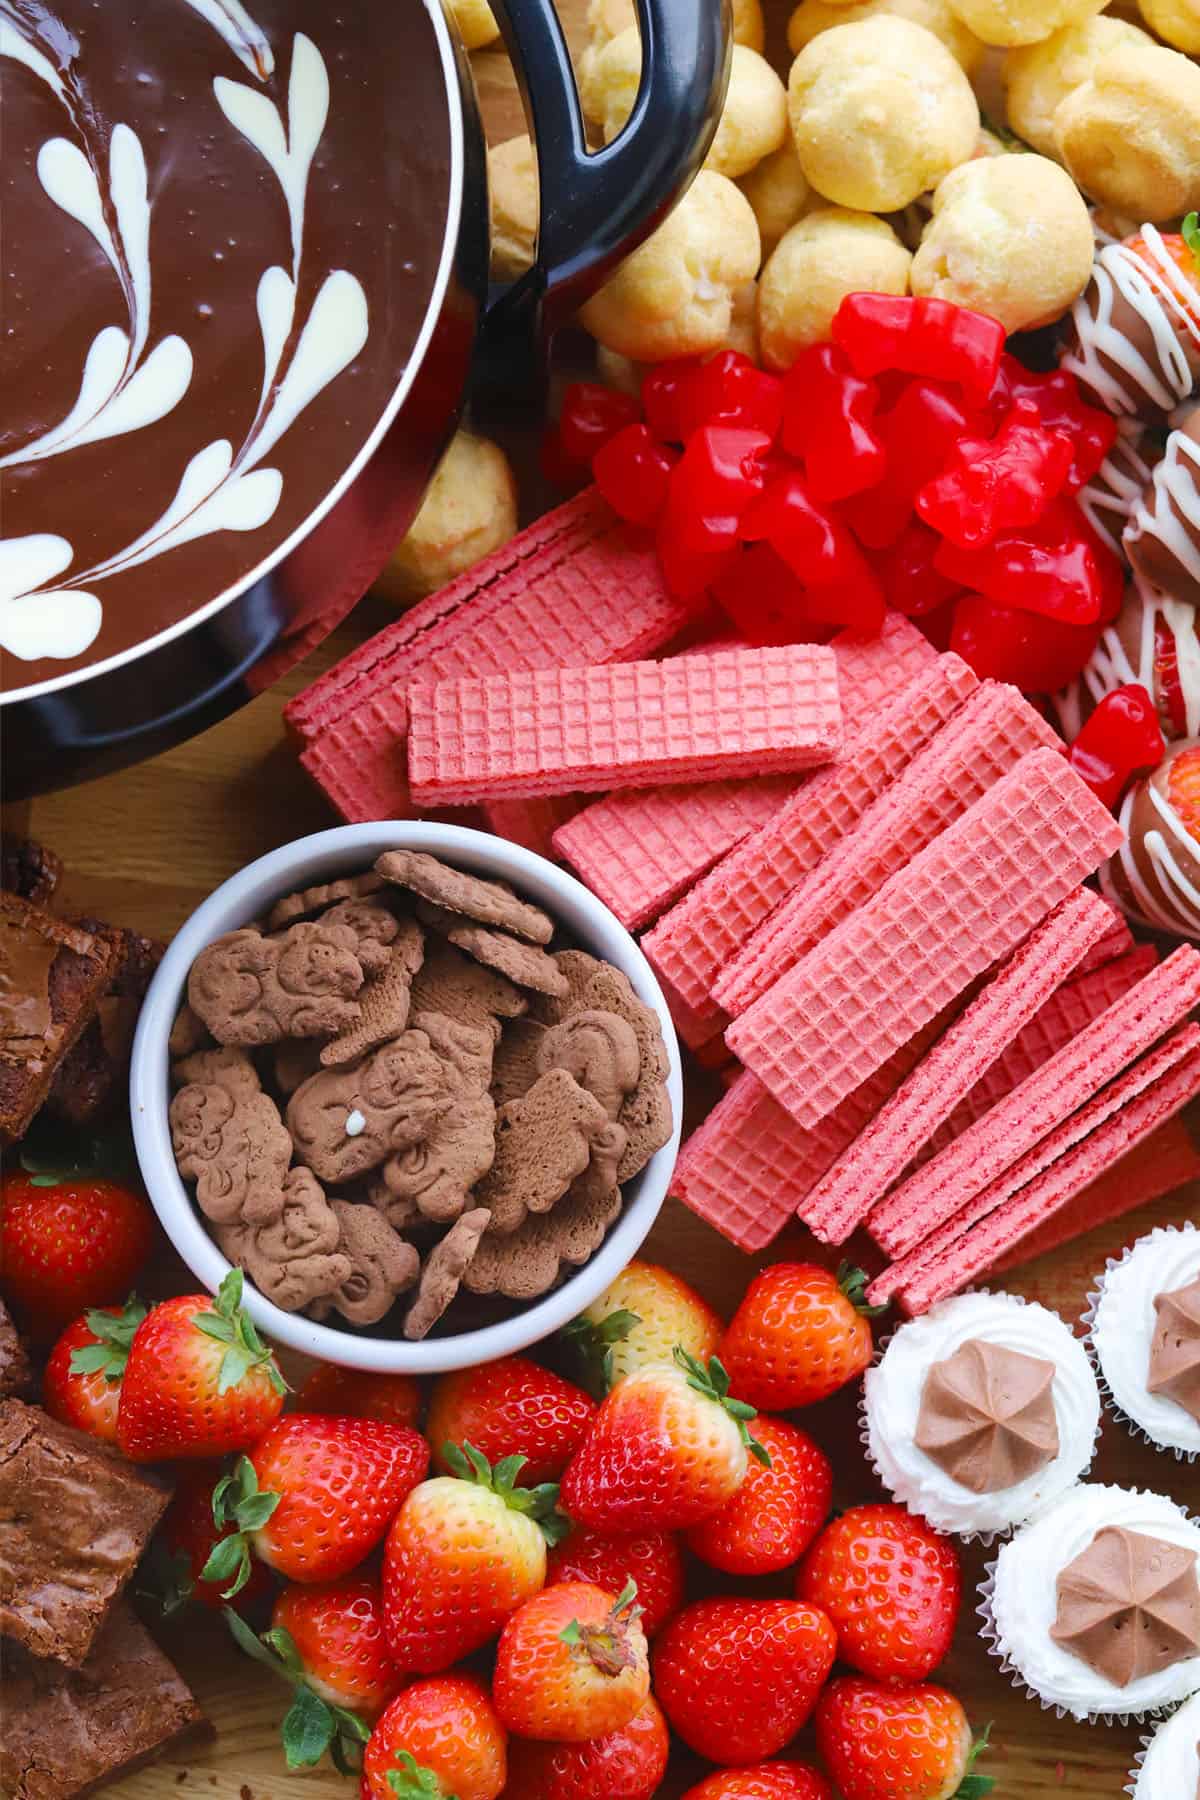 chocolate fondue dippers and fruit for recipe chocolate fondue recipe. fondue recipes chocolate, fondue chocolate. 